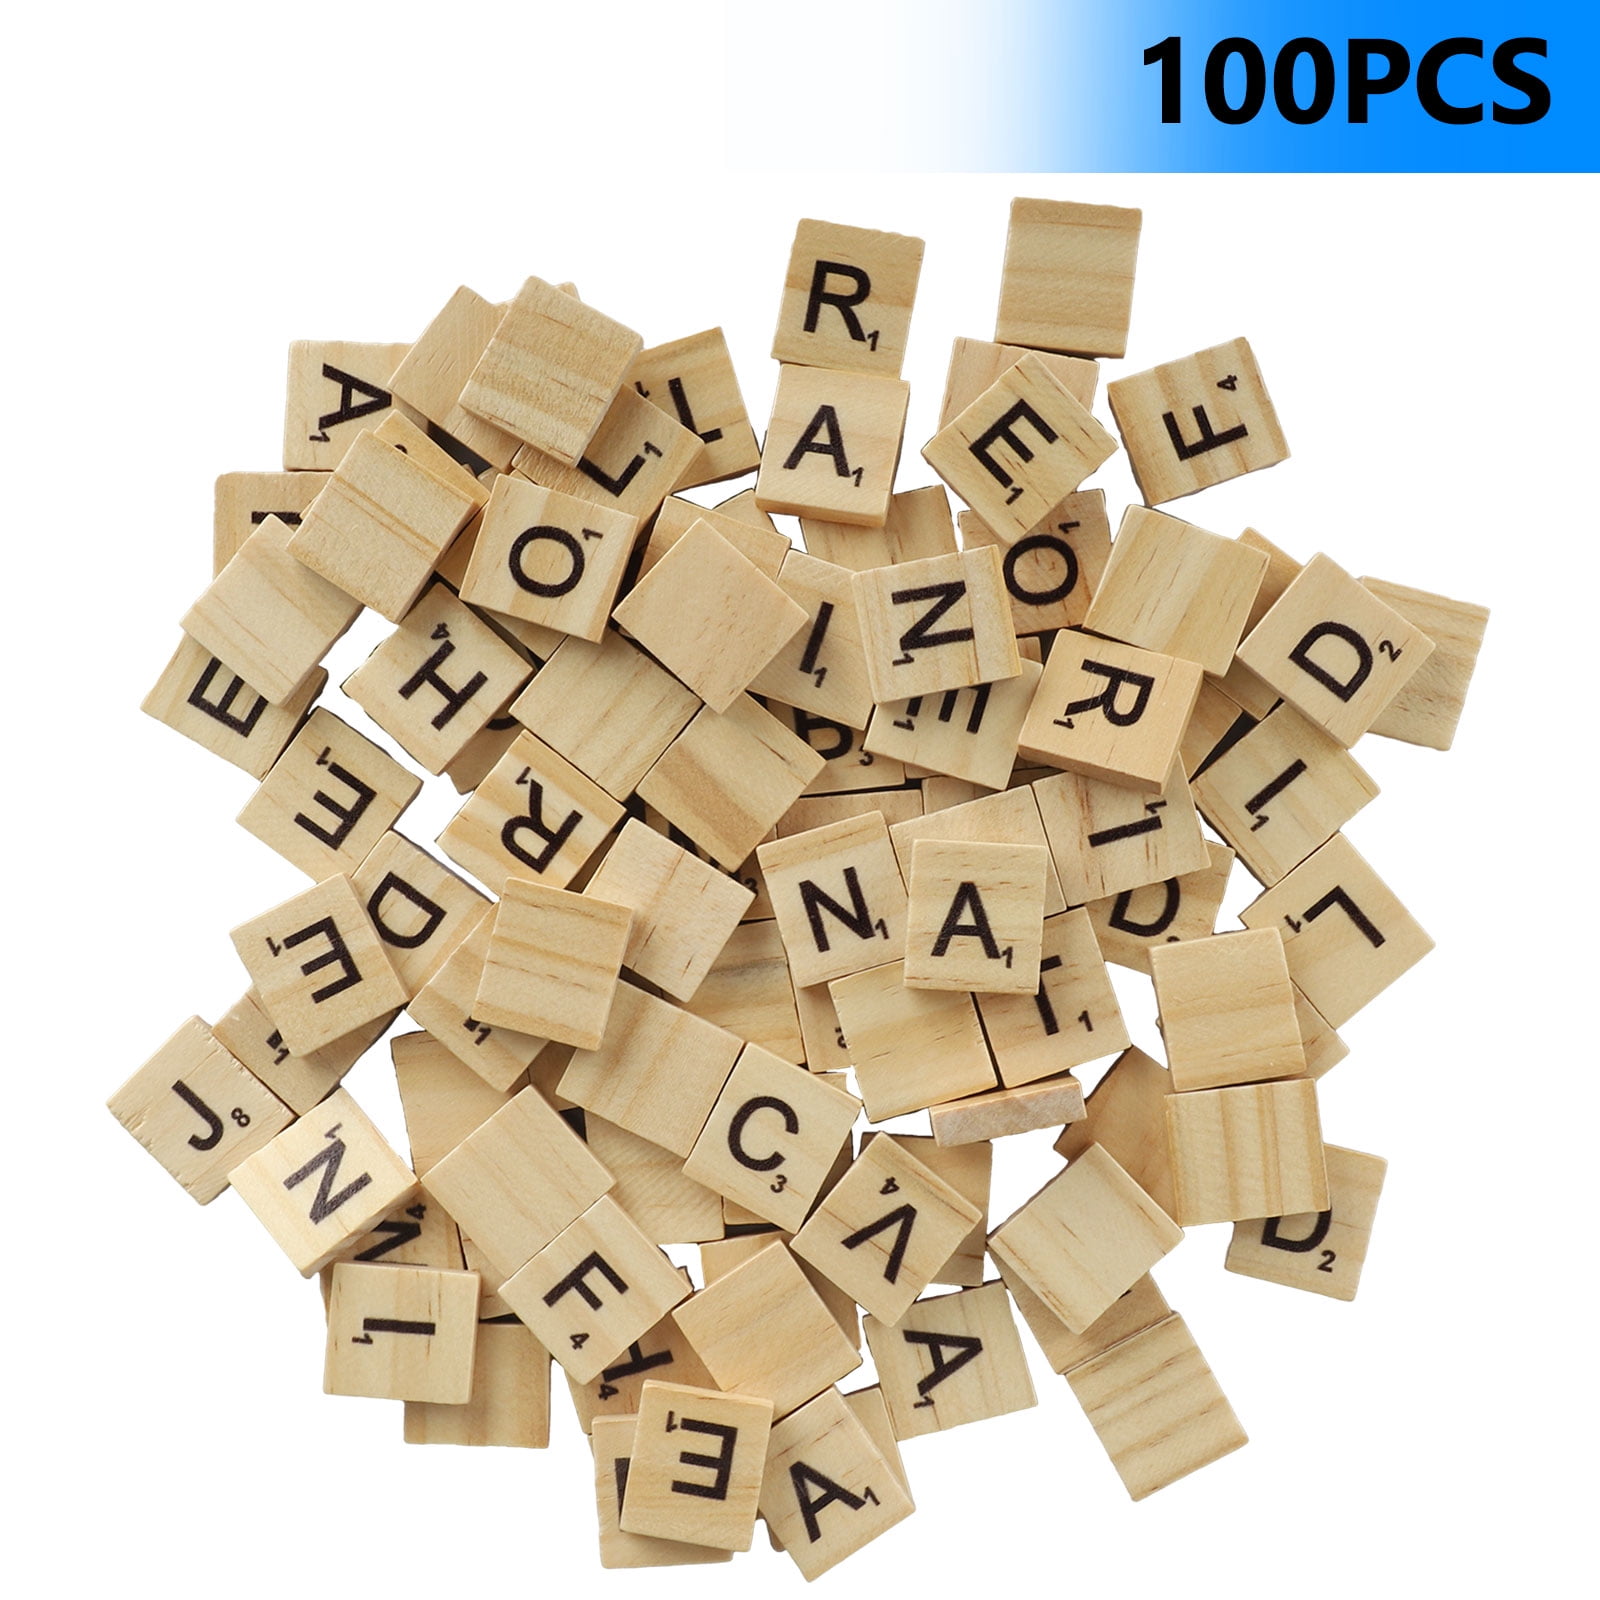 200 WOODEN SCRABBLE TILES BLACK LETTERS NUMBERS FOR CRAFTS WOOD ALPHABETS 